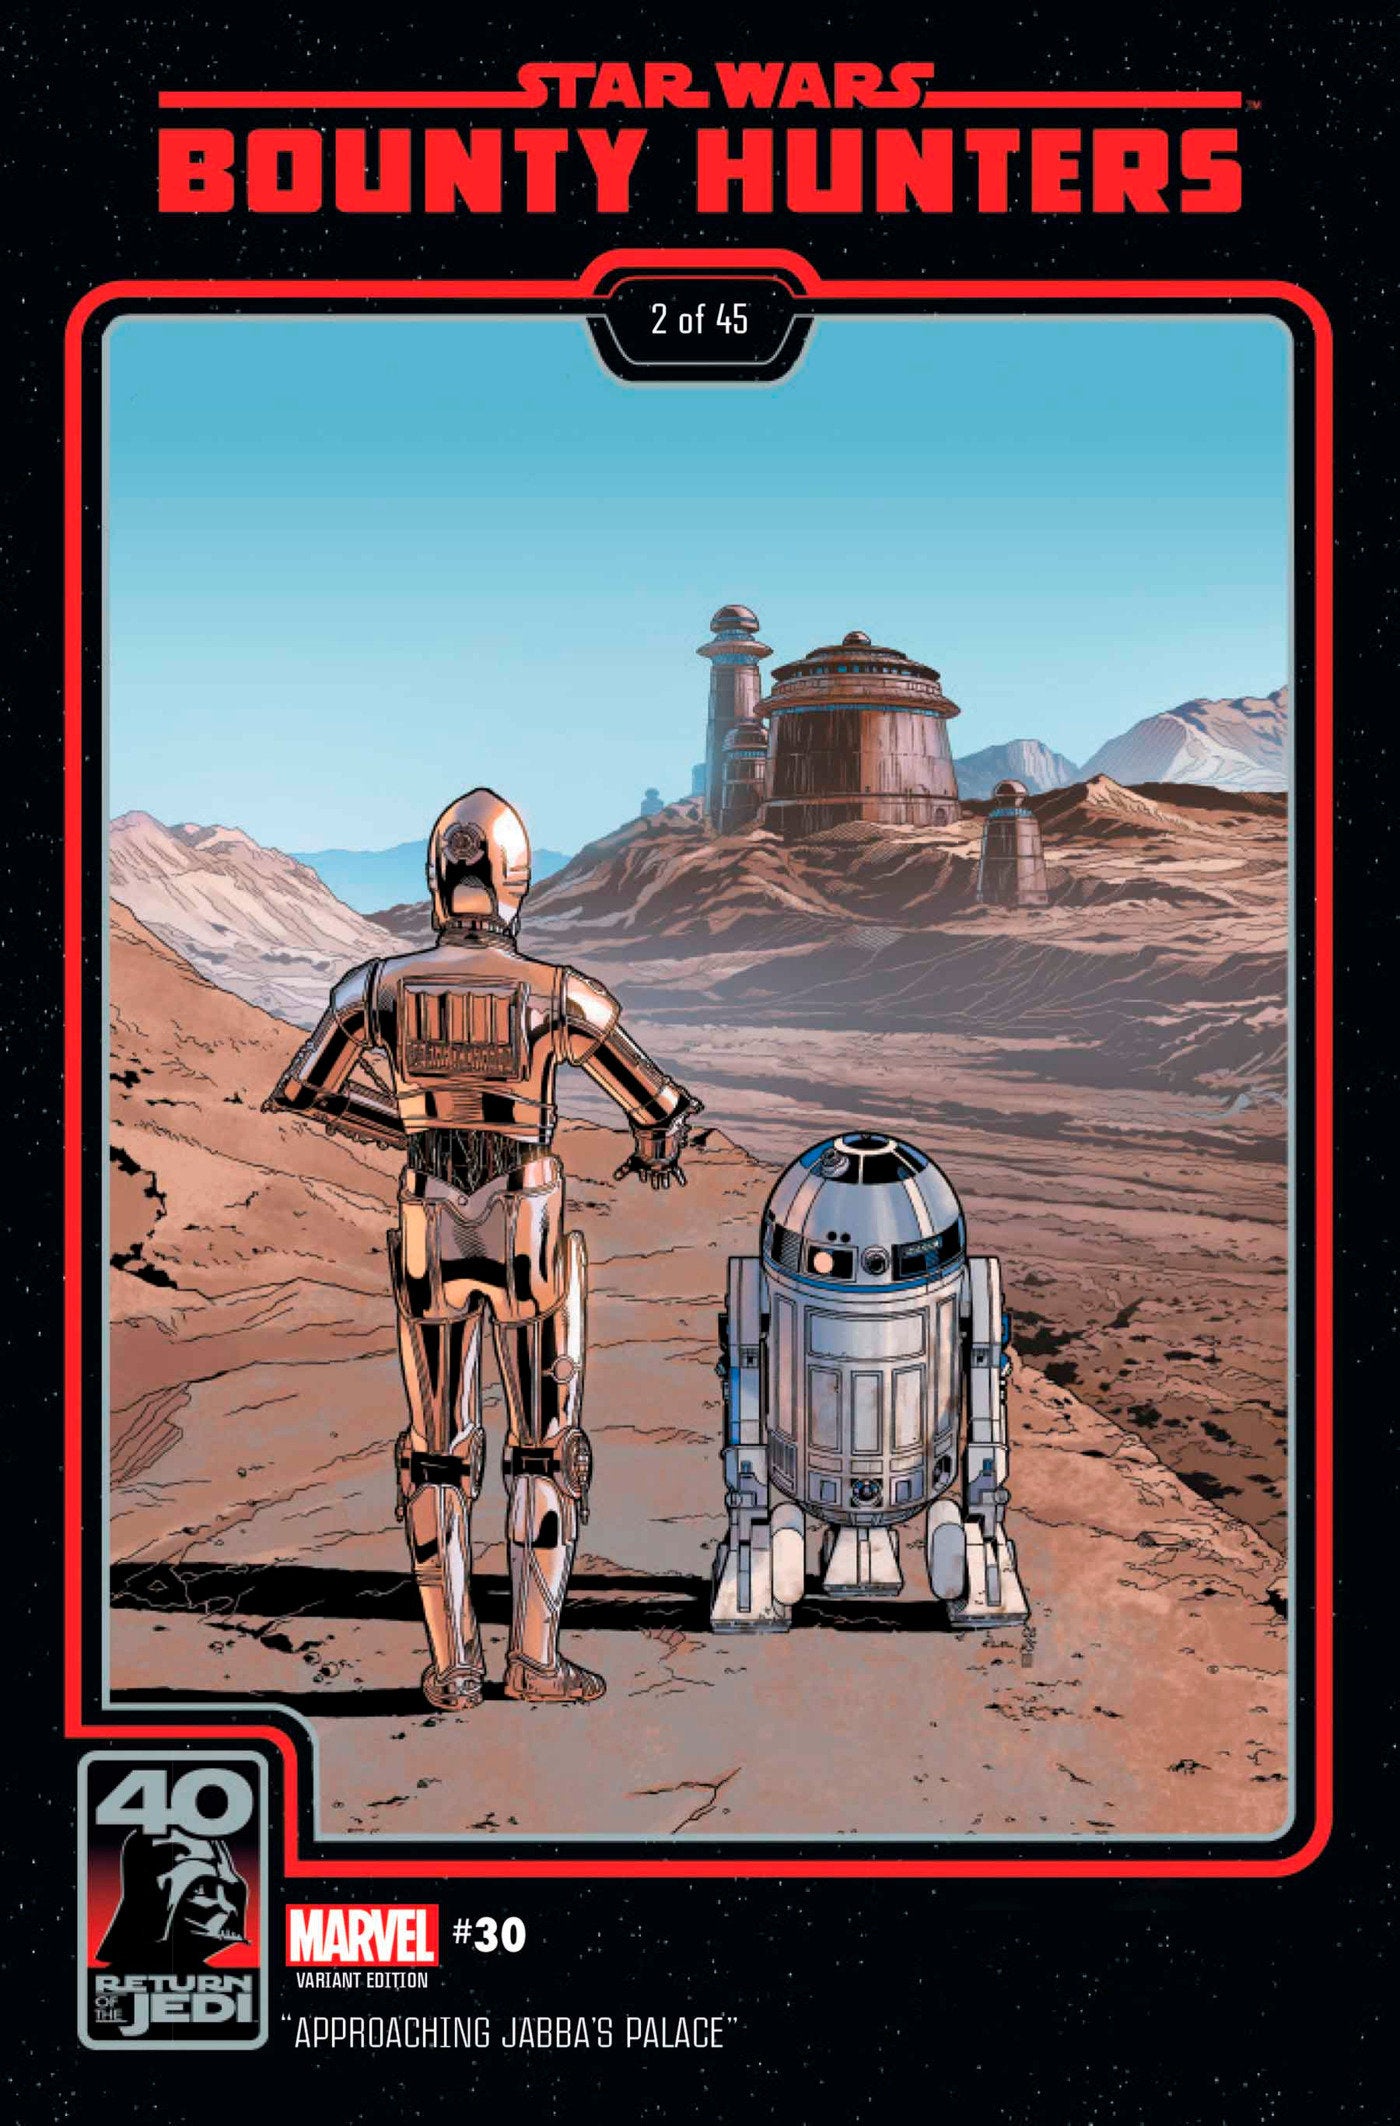 STAR WARS: BOUNTY HUNTERS 30 SPROUSE RETURN OF THE JEDI 40TH ANNIVERSARY VARIANT